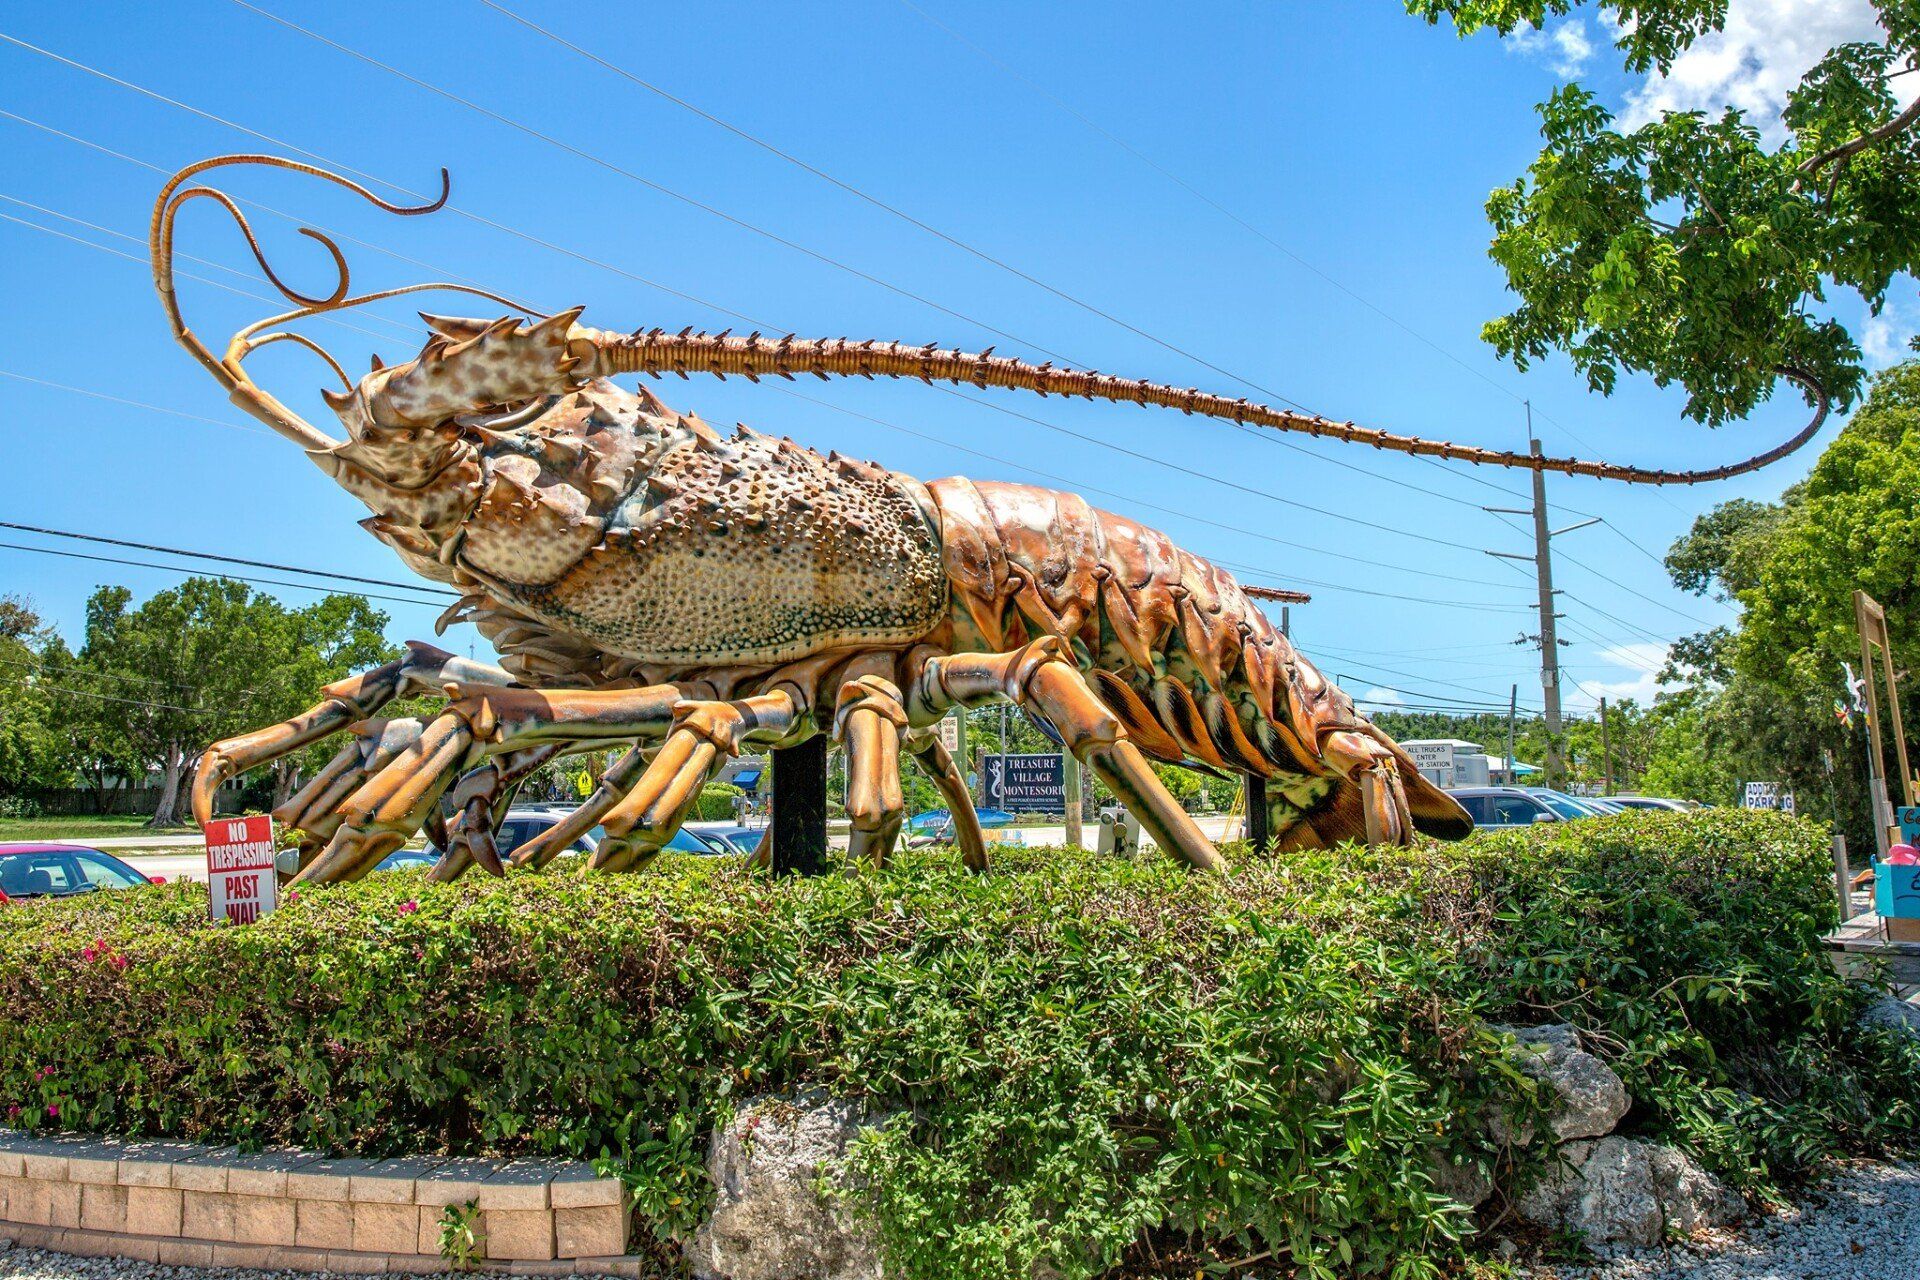 World's Largest Spiny Lobster Sculpture: world record in Islamorada, Florida